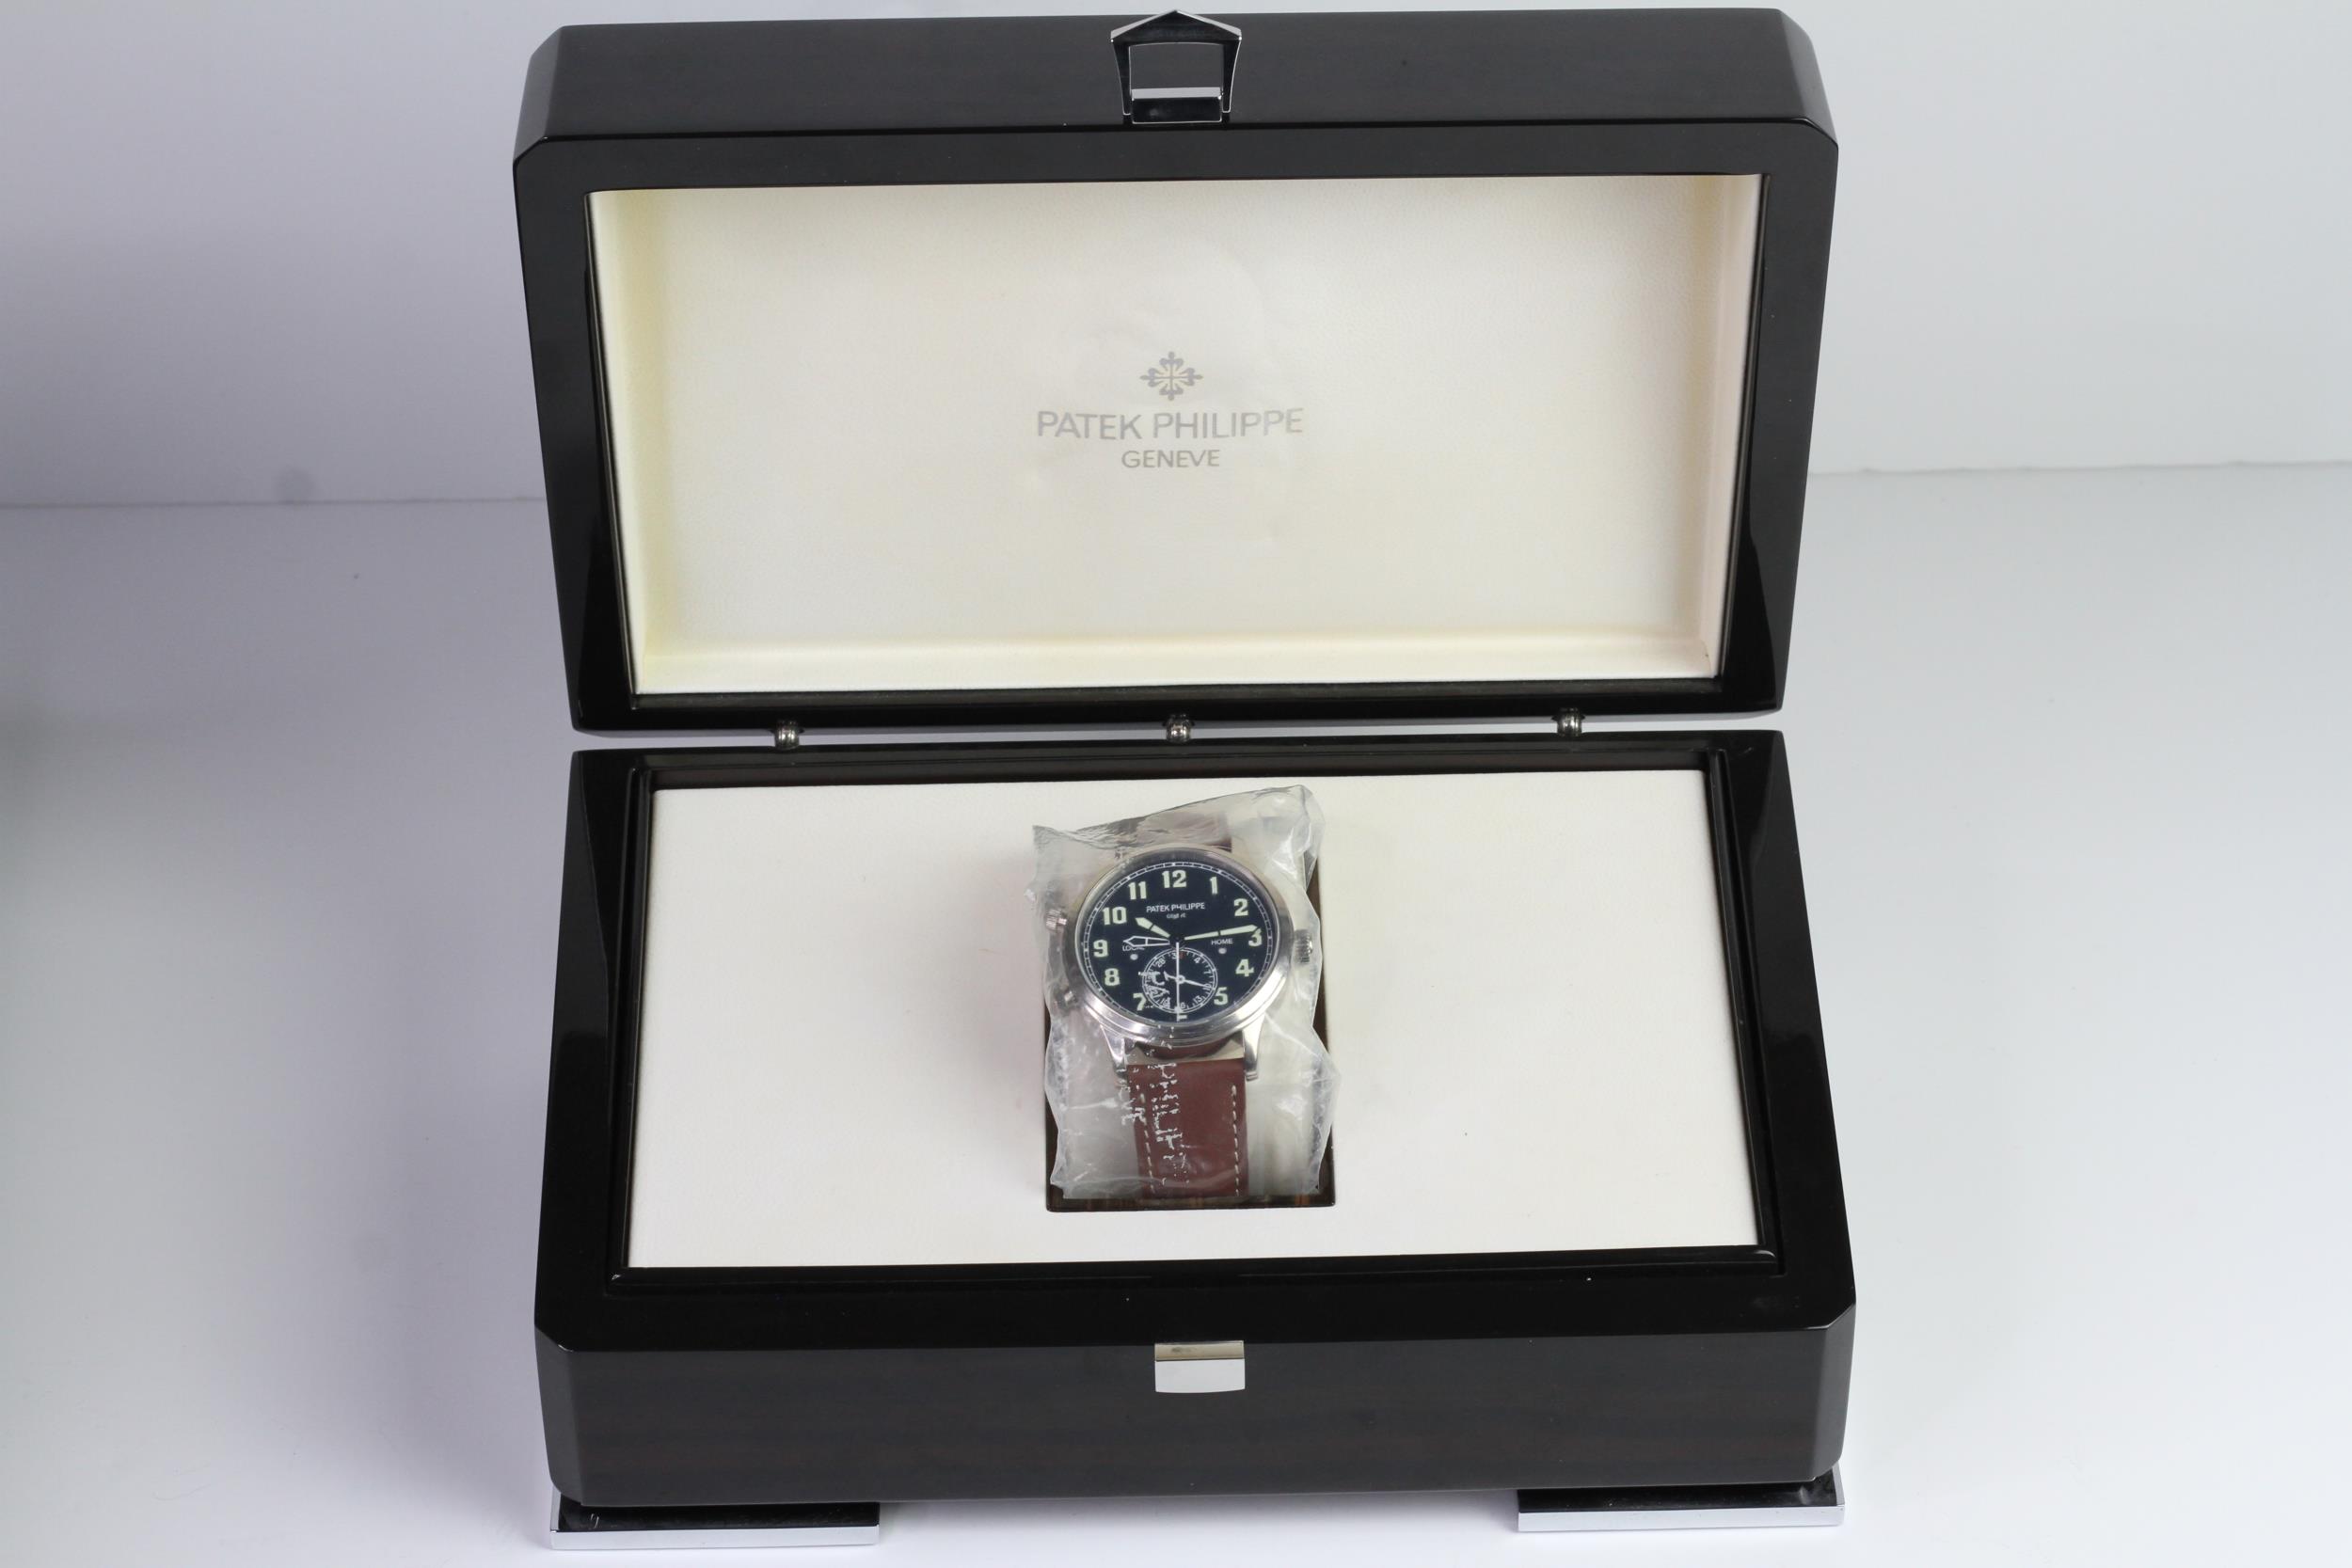 A FINE PATEK PHILIPPE CALATRAVA PILOT TRAVEL TIME REFERENCE 5224G-001, SEALED FROM SERVICE, WITH BOX - Image 2 of 19